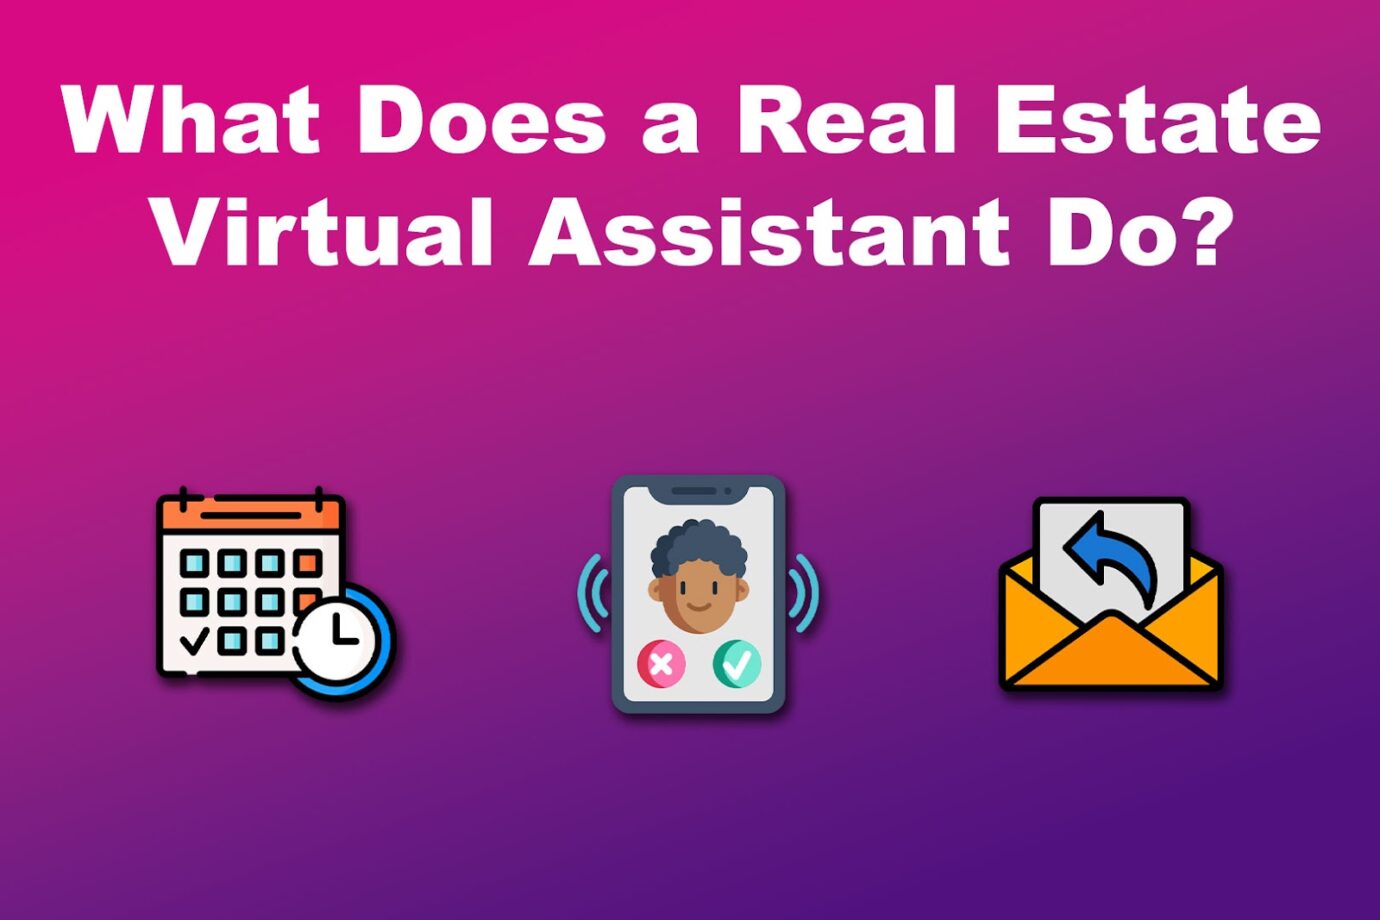 What Does a Real Estate Virtual Assistant Do?